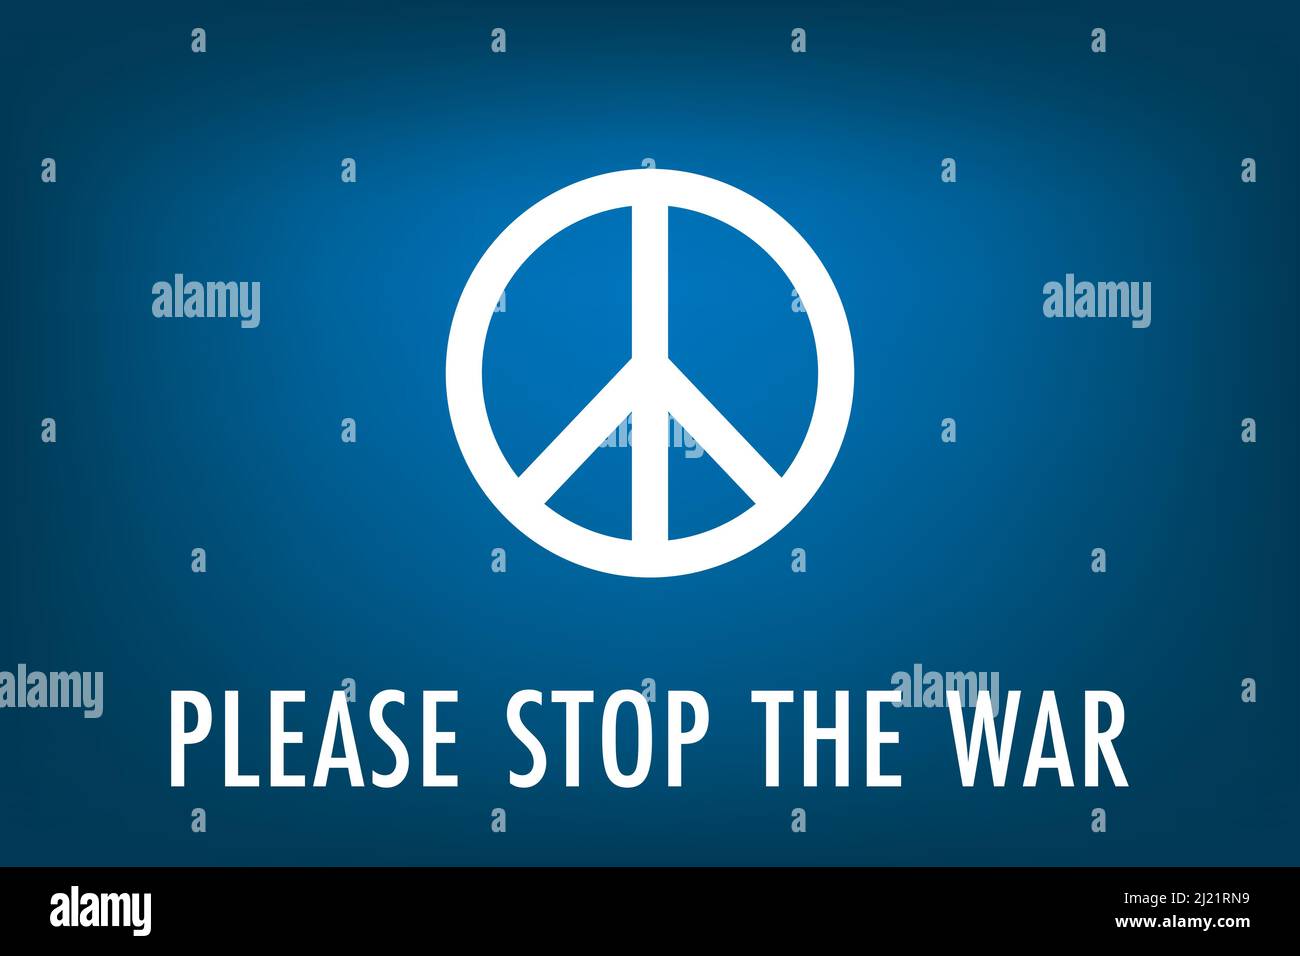 Please stop the war - Peace sign on blue background Stock Vector